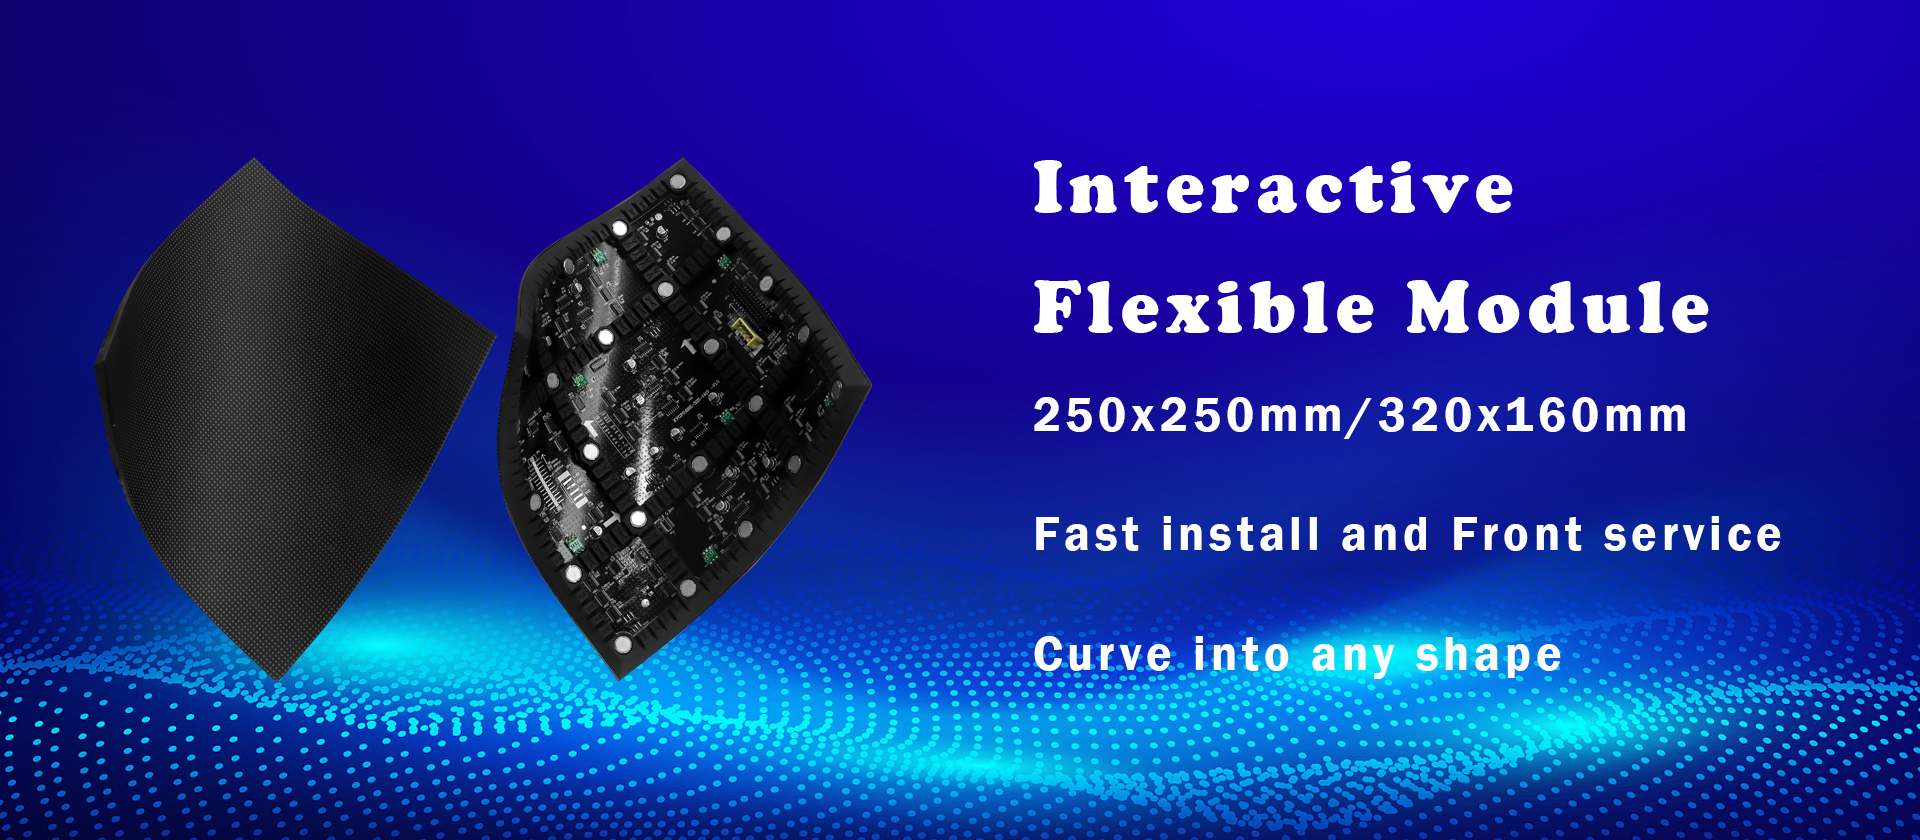 interactive-flexible-led-module-curved-sphere-customized-creative-product-xin yi guang-xygled